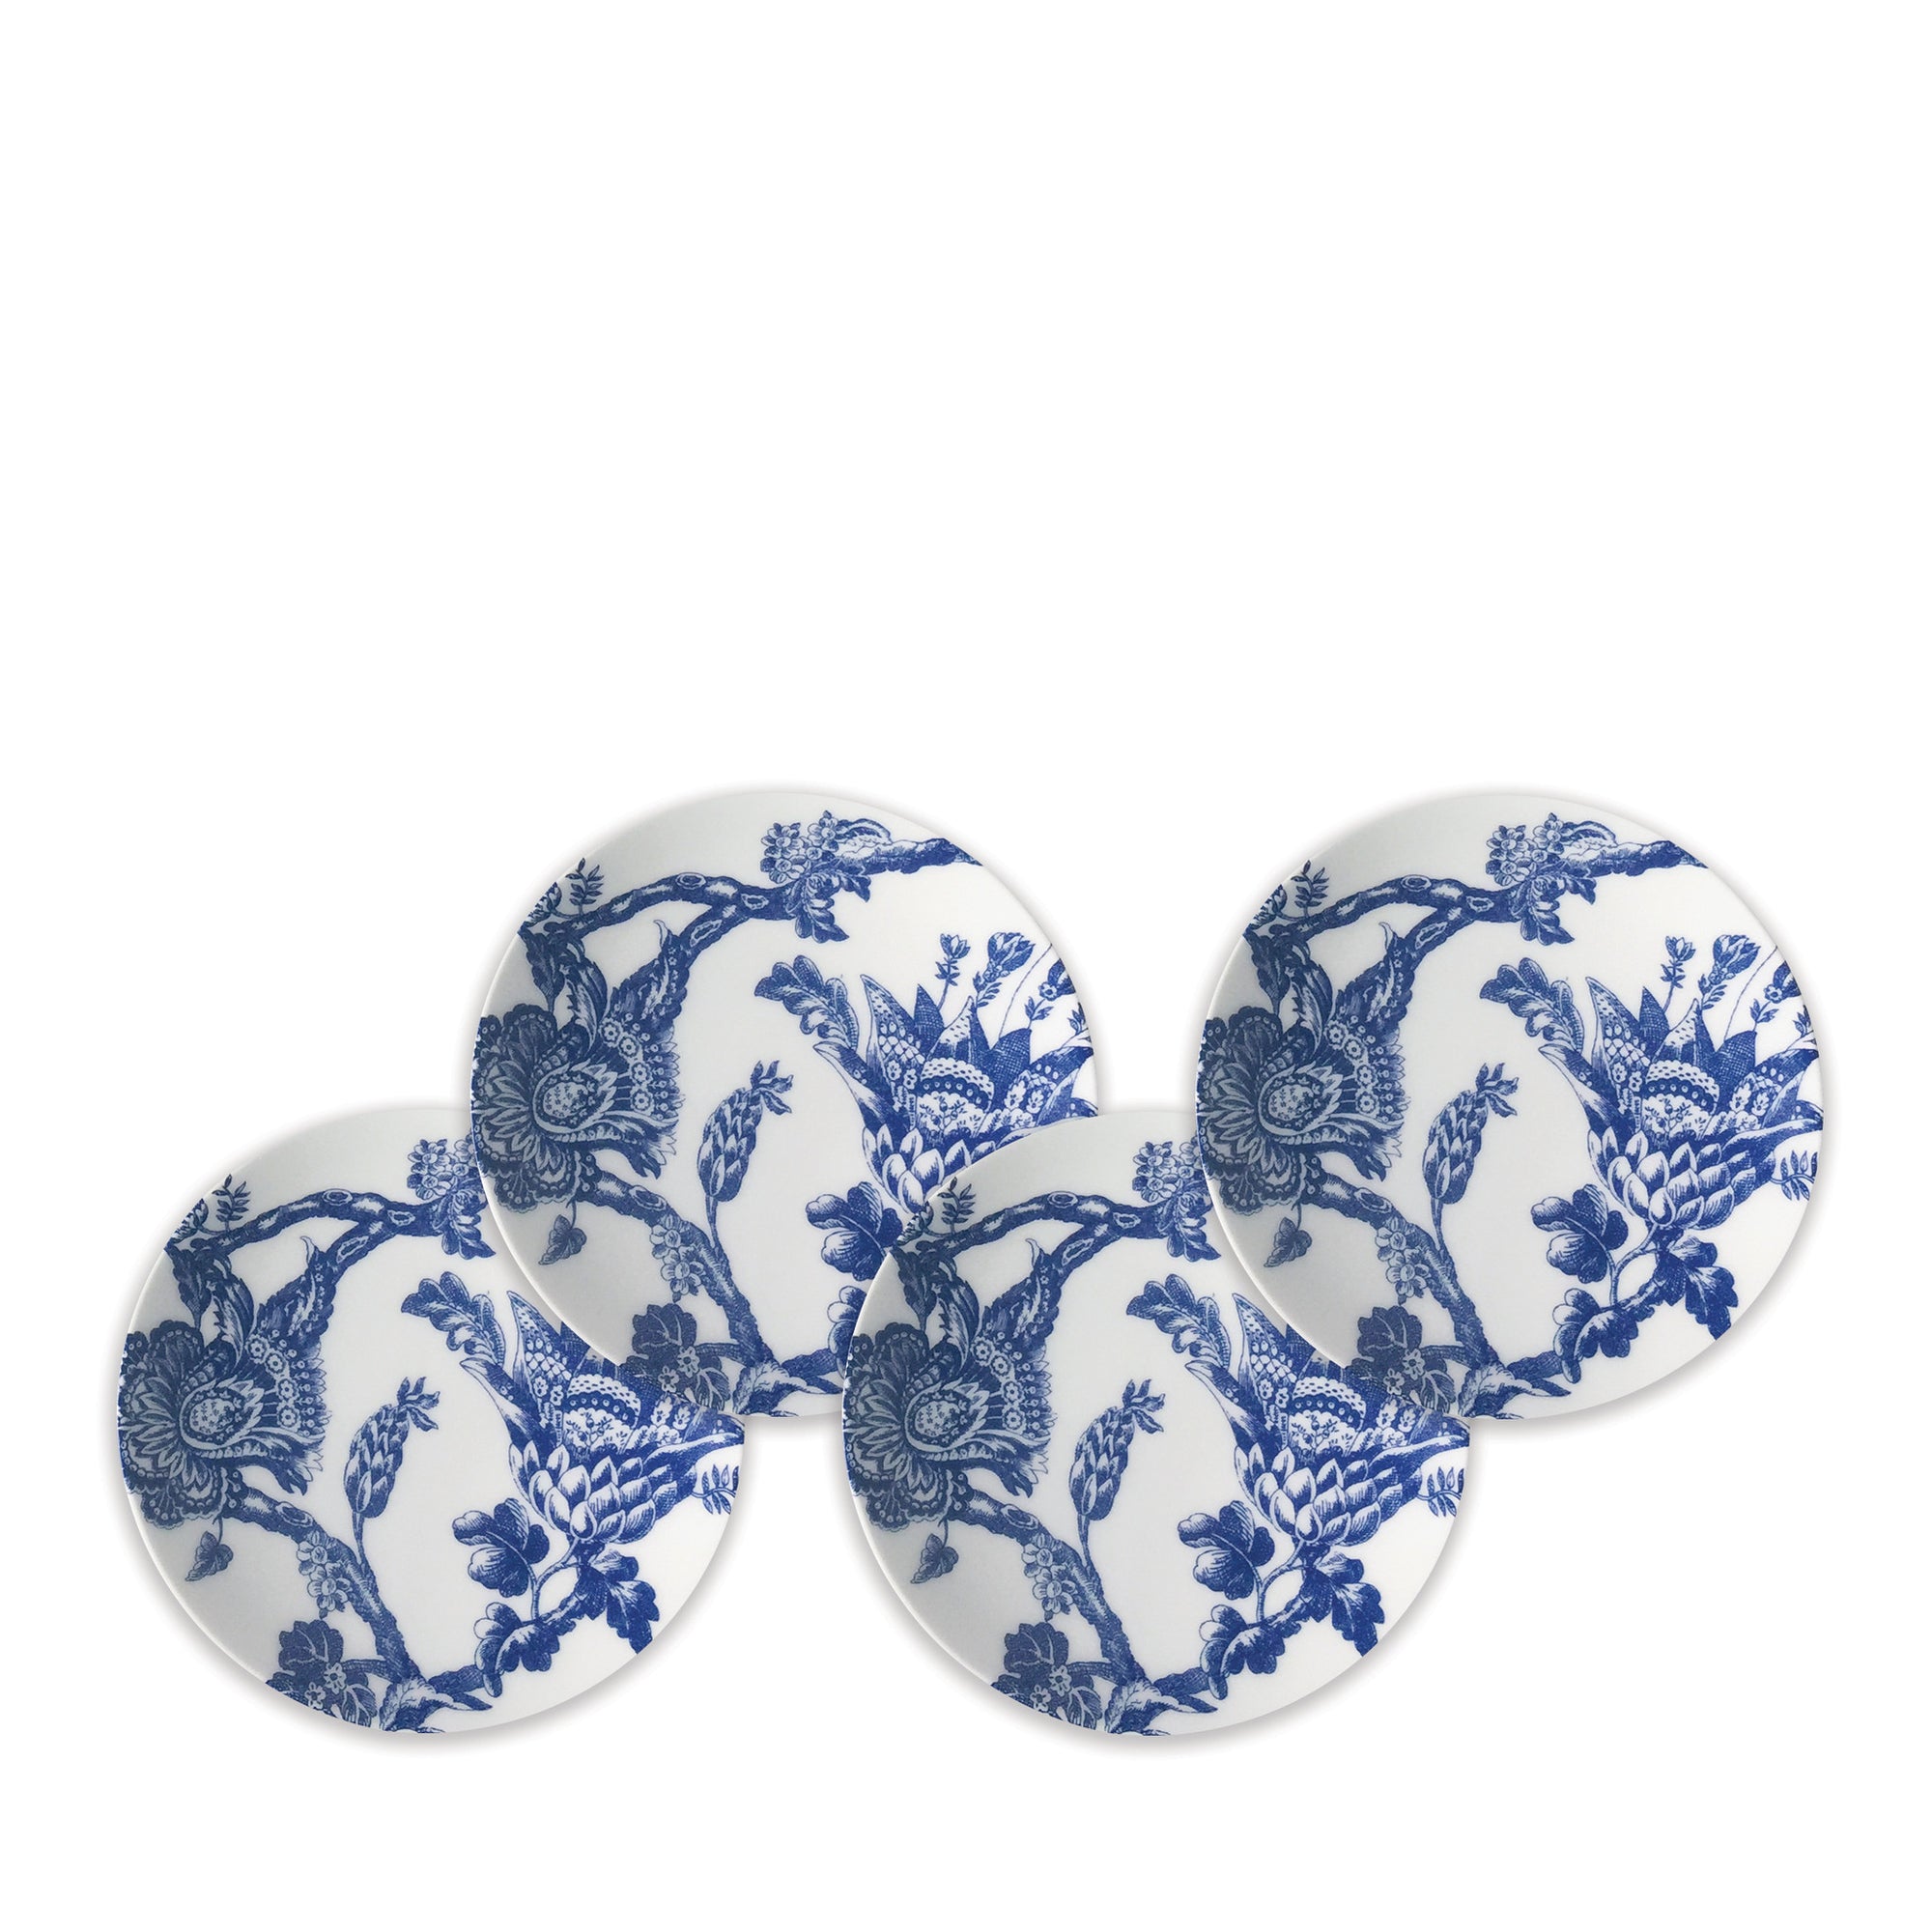 Four premium Arcadia Small Plates by Caskata Artisanal Home with blue floral designs are arranged in a slightly overlapping circular pattern.